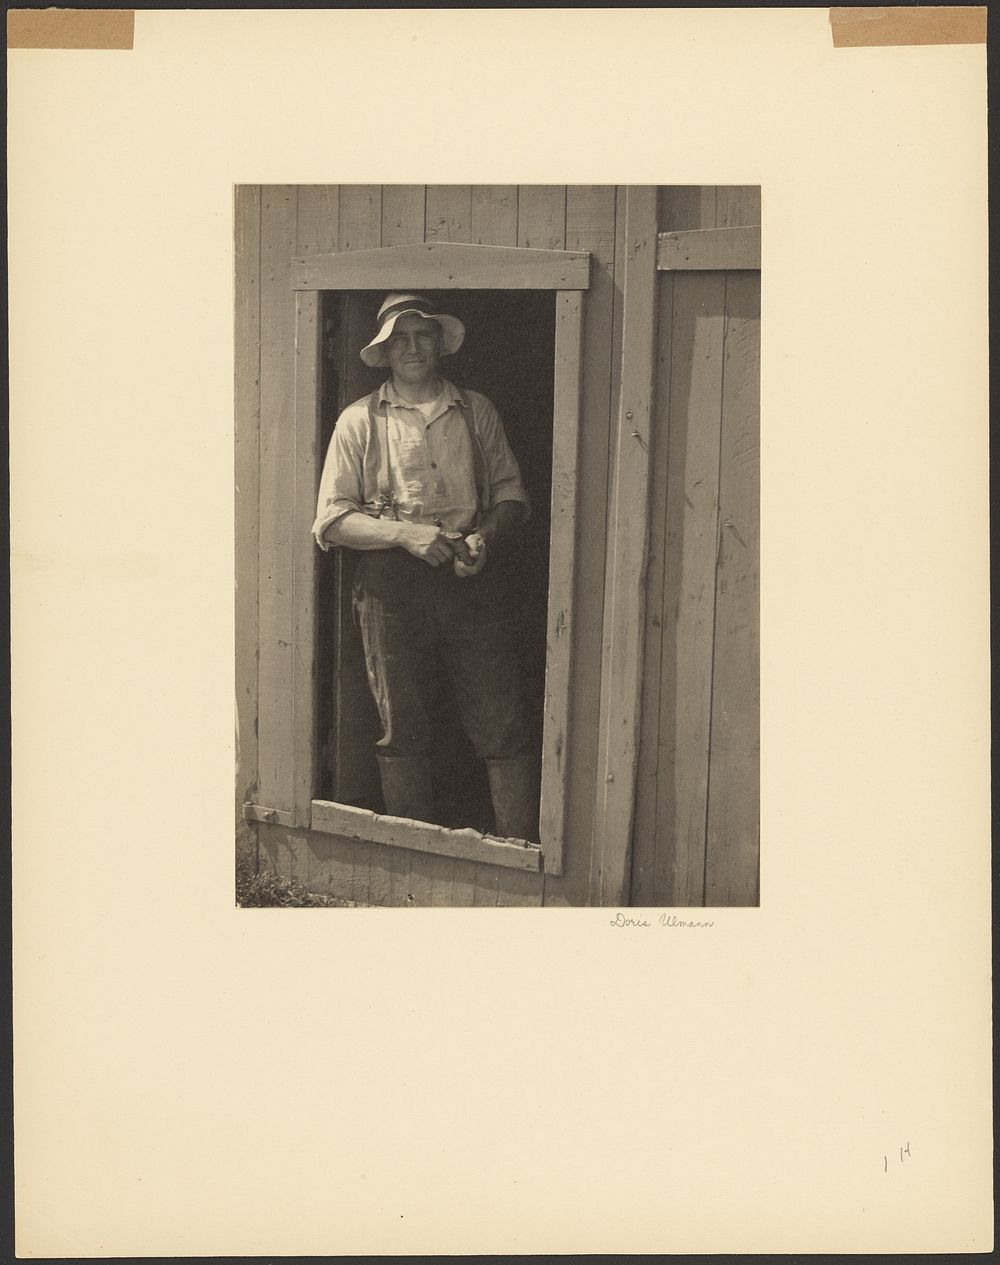 Man in a Straw Hat Standing in Doorway of a Barn Holding a Tobacco Pouch by Doris Ulmann